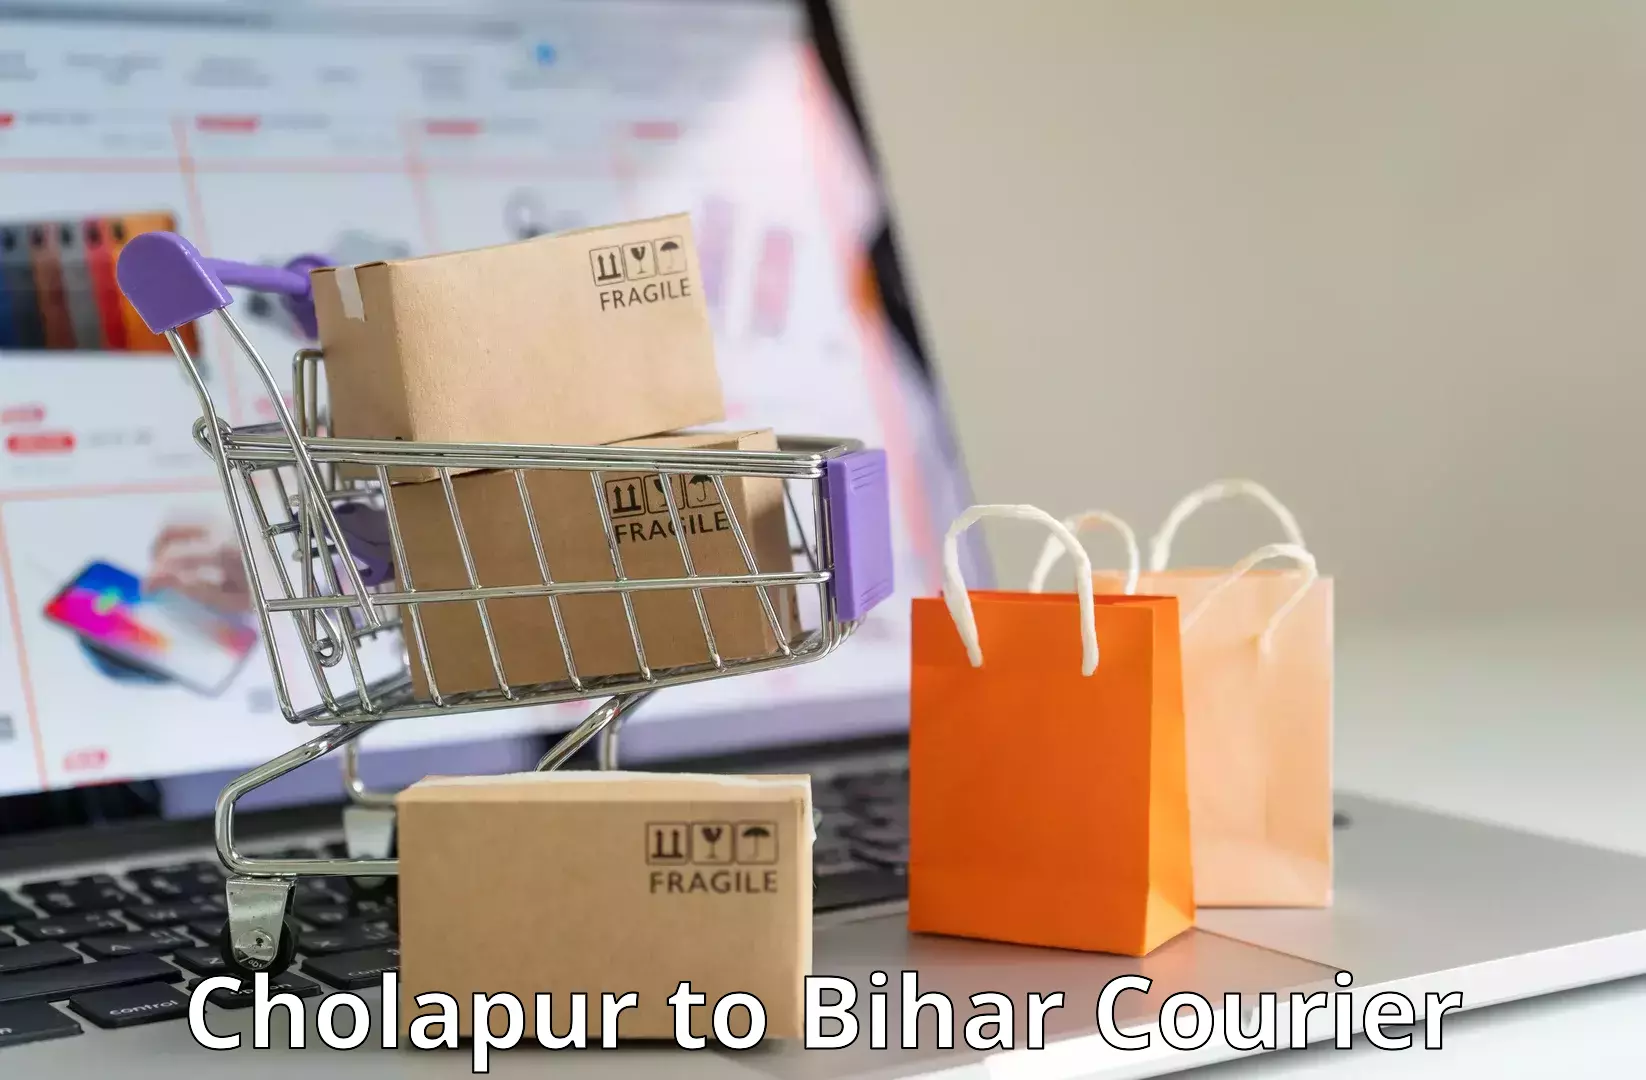 On-call courier service Cholapur to Mohammadpur